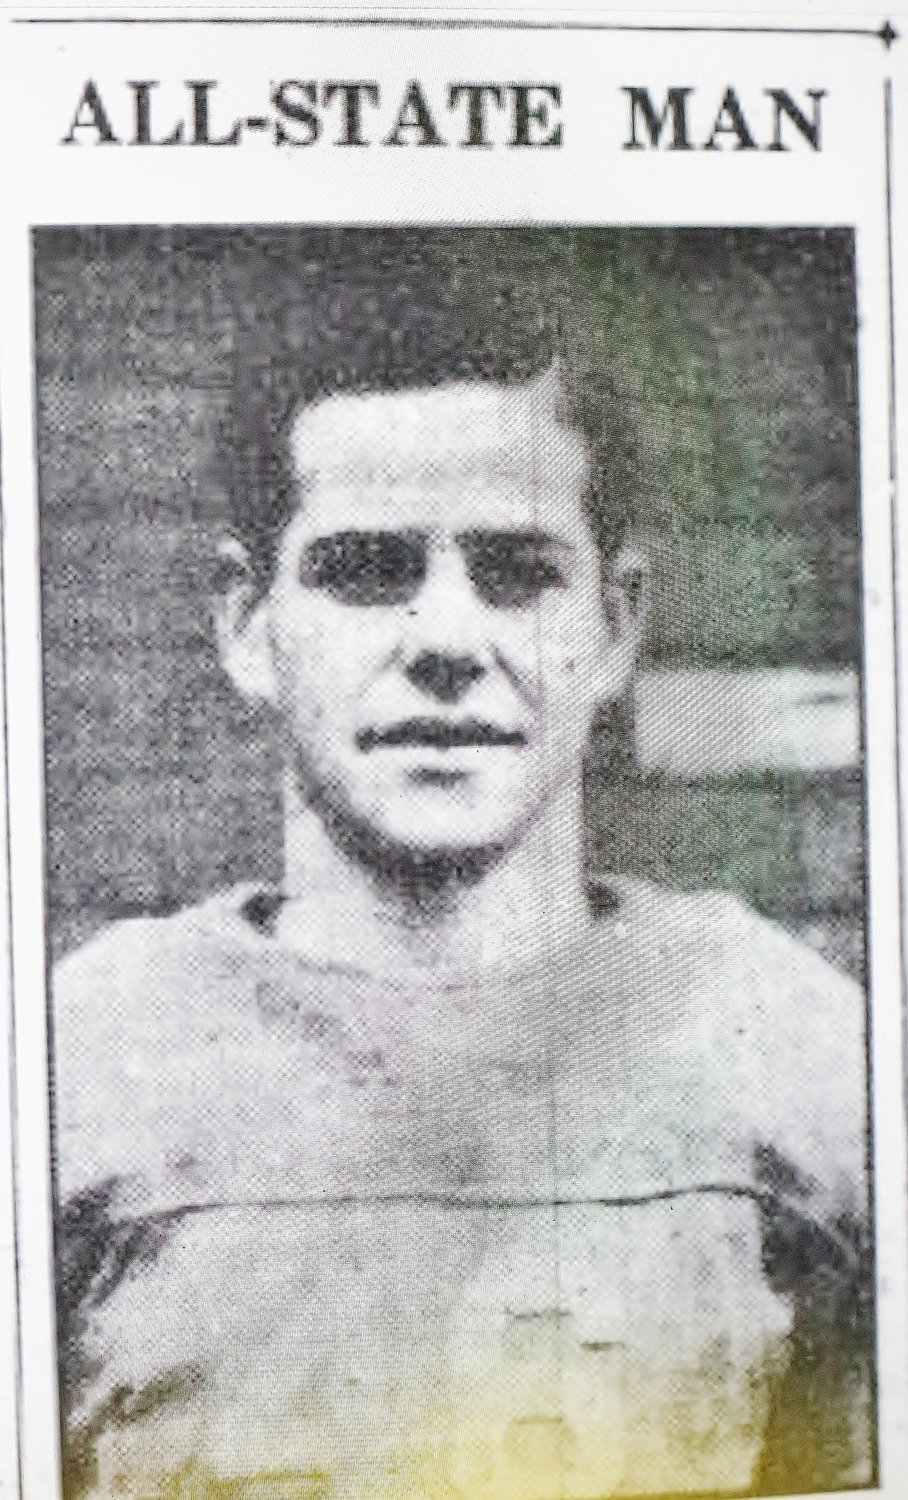 Hugh A. Pennal’s photo ran in the Mineola Monitor at the time he was selected for 1937 all-state honors.